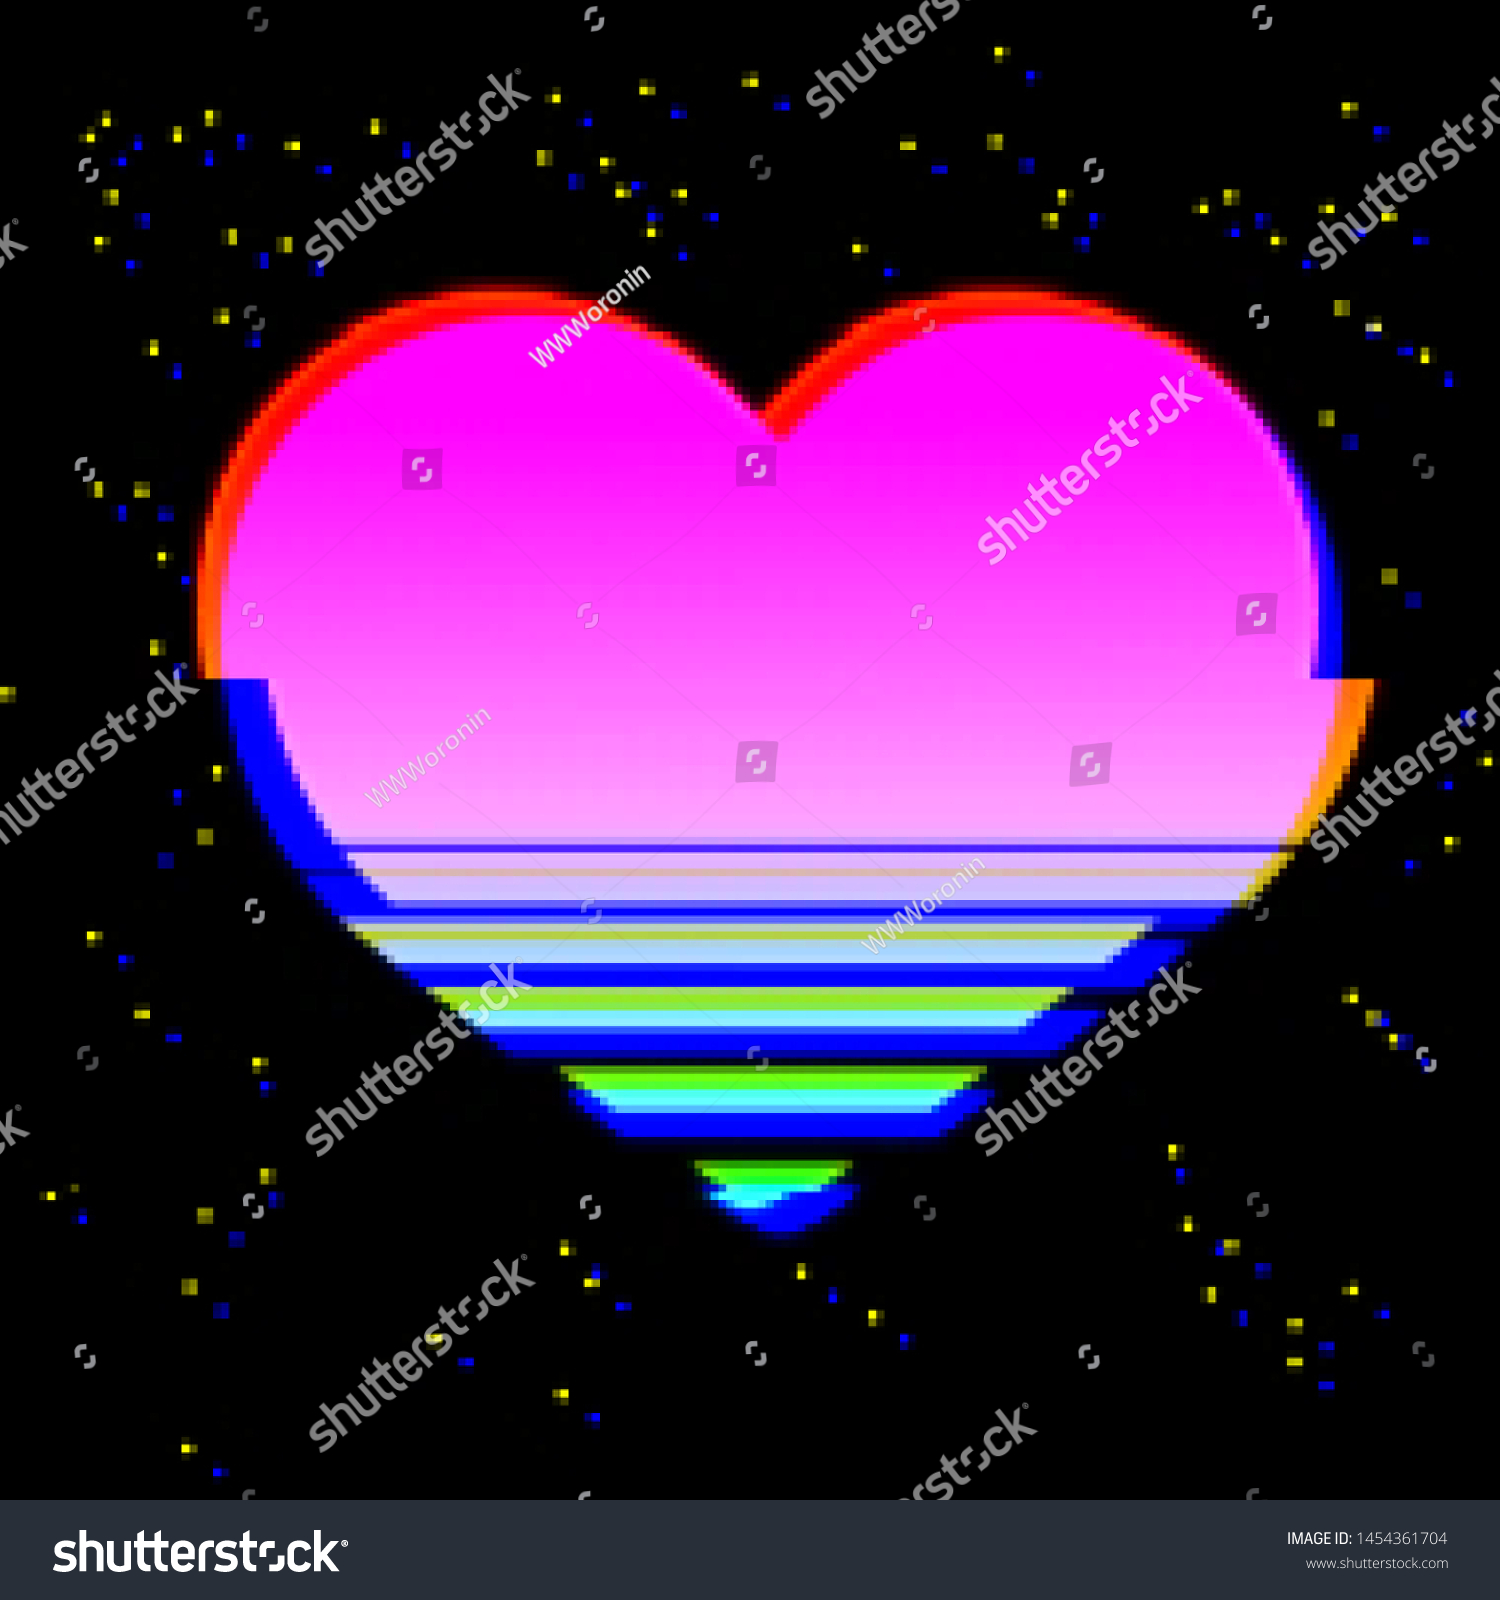 Glitched Glowing Heart Icon Cyberpunk Style Stock Vector (Royalty Free ...